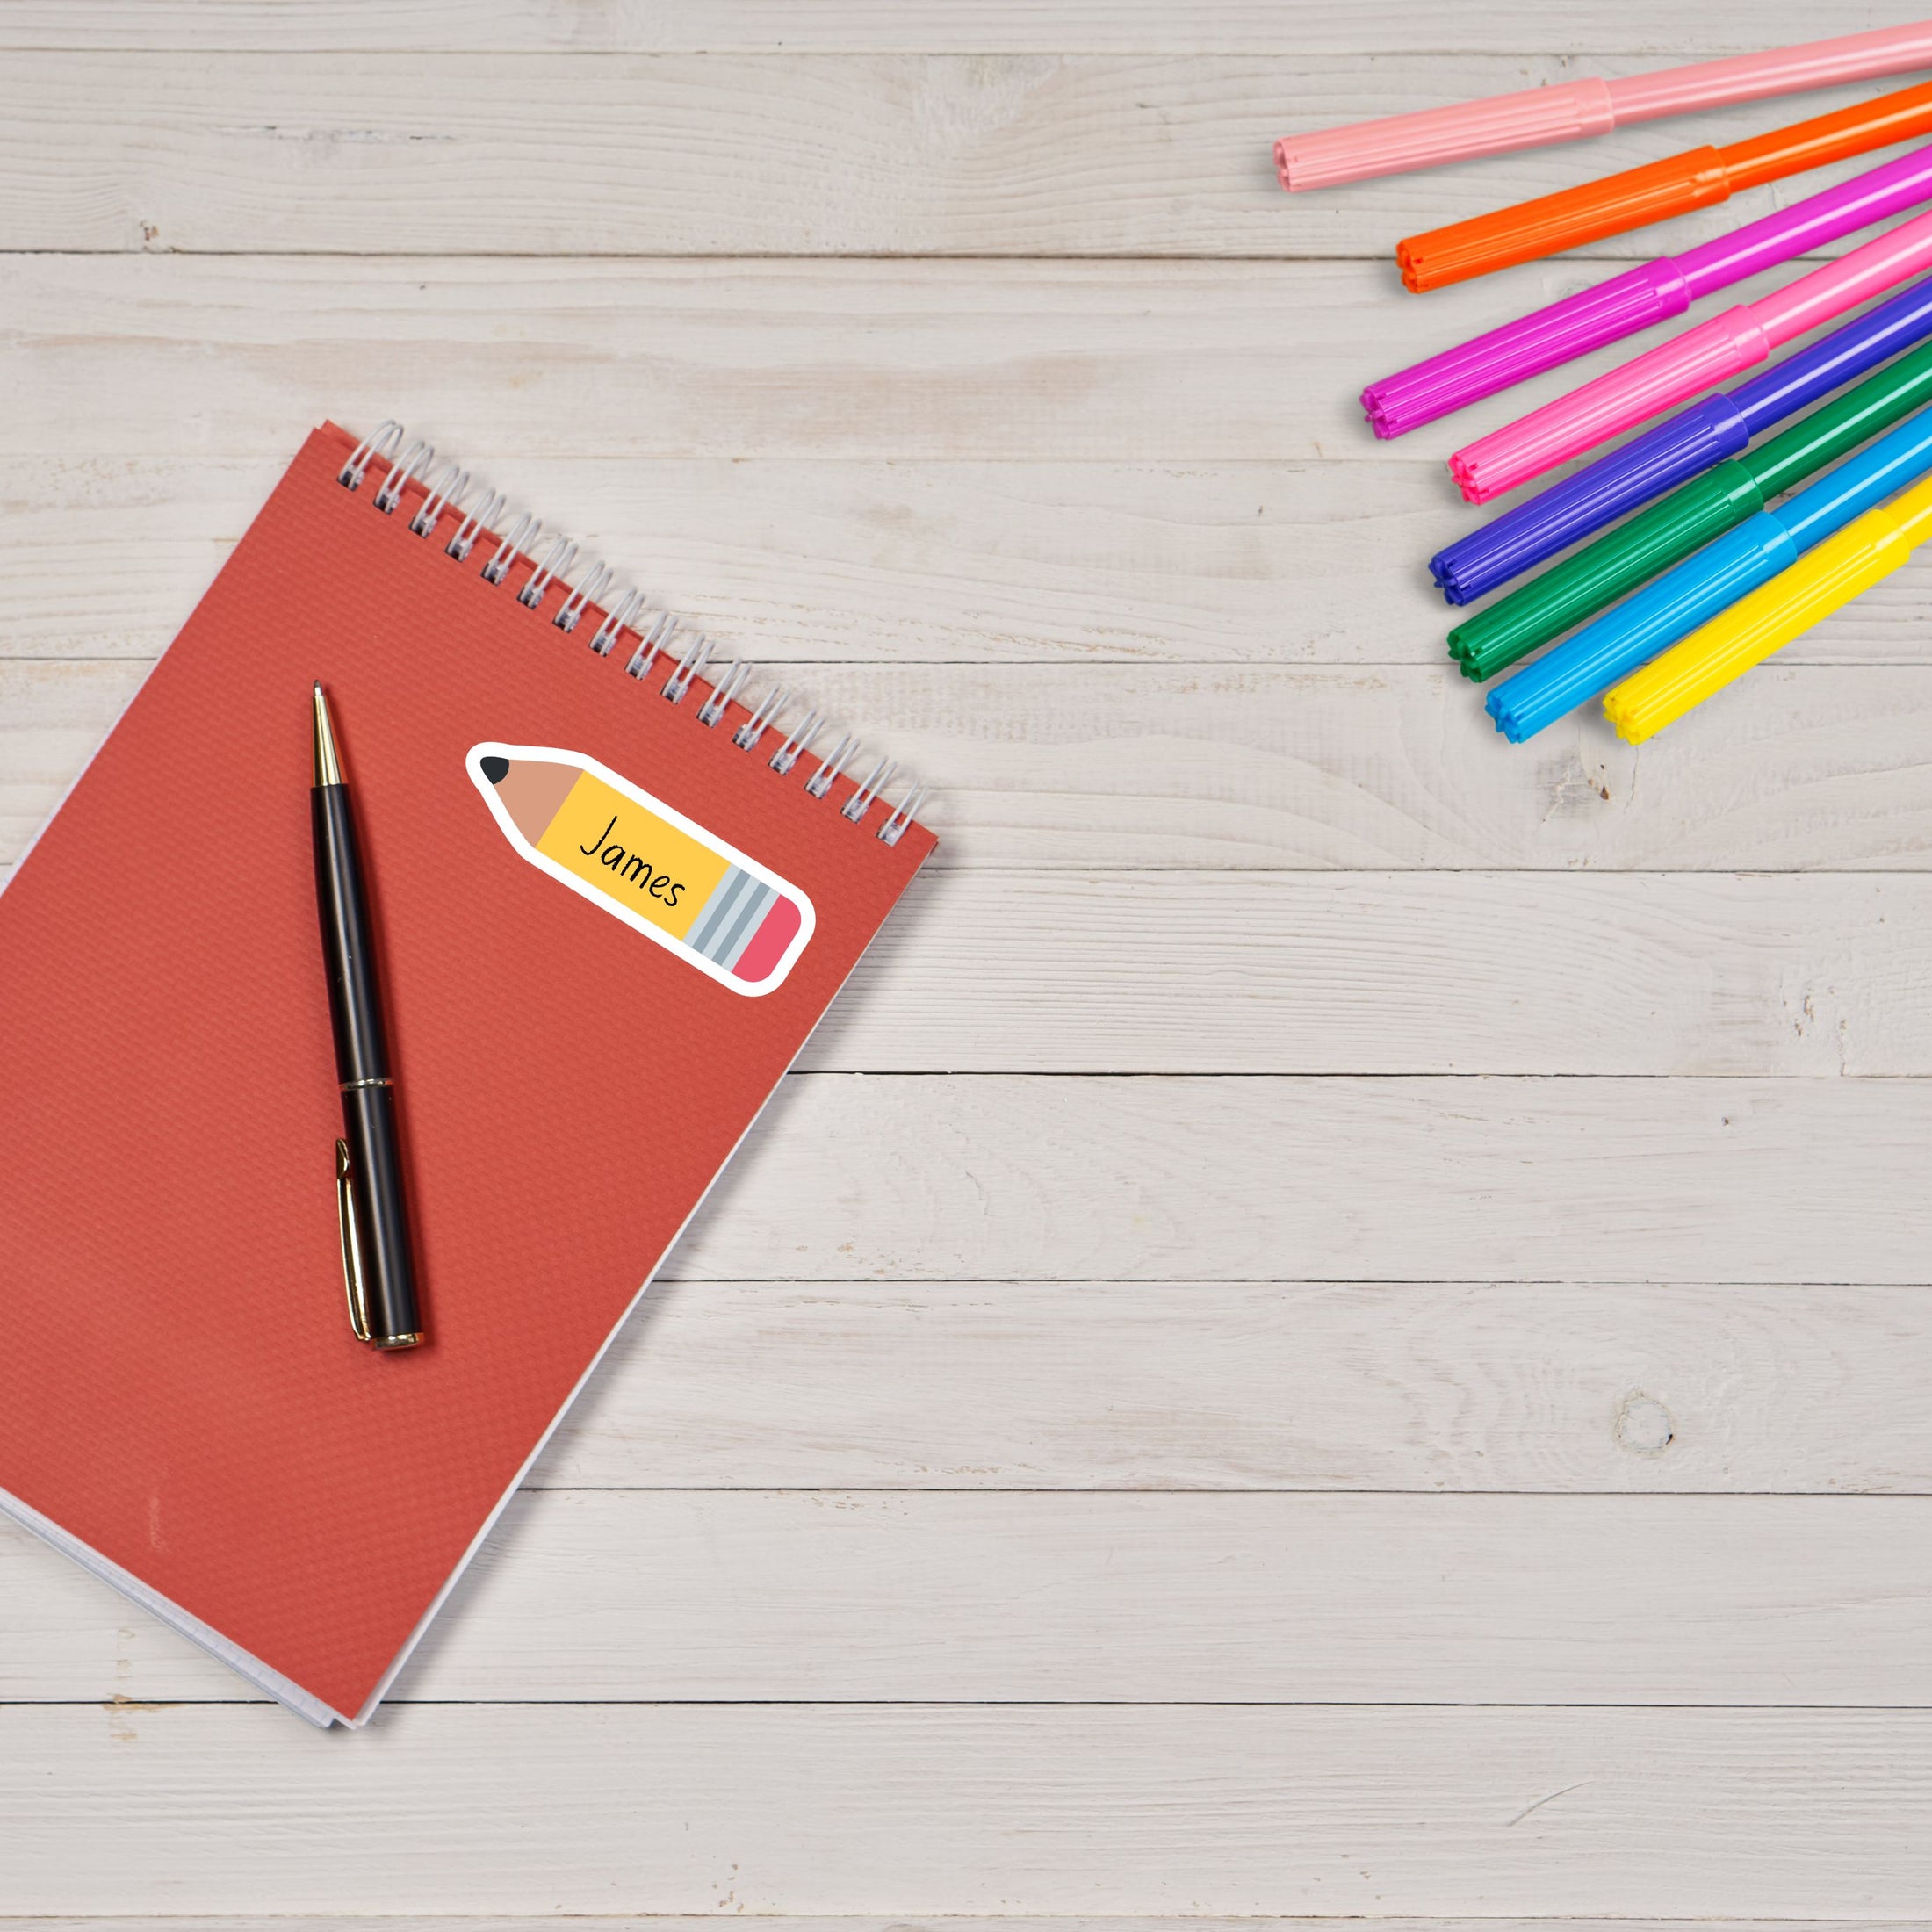 This image shows the personalized school sticker on a notebook with colored pens in the upper right corner..